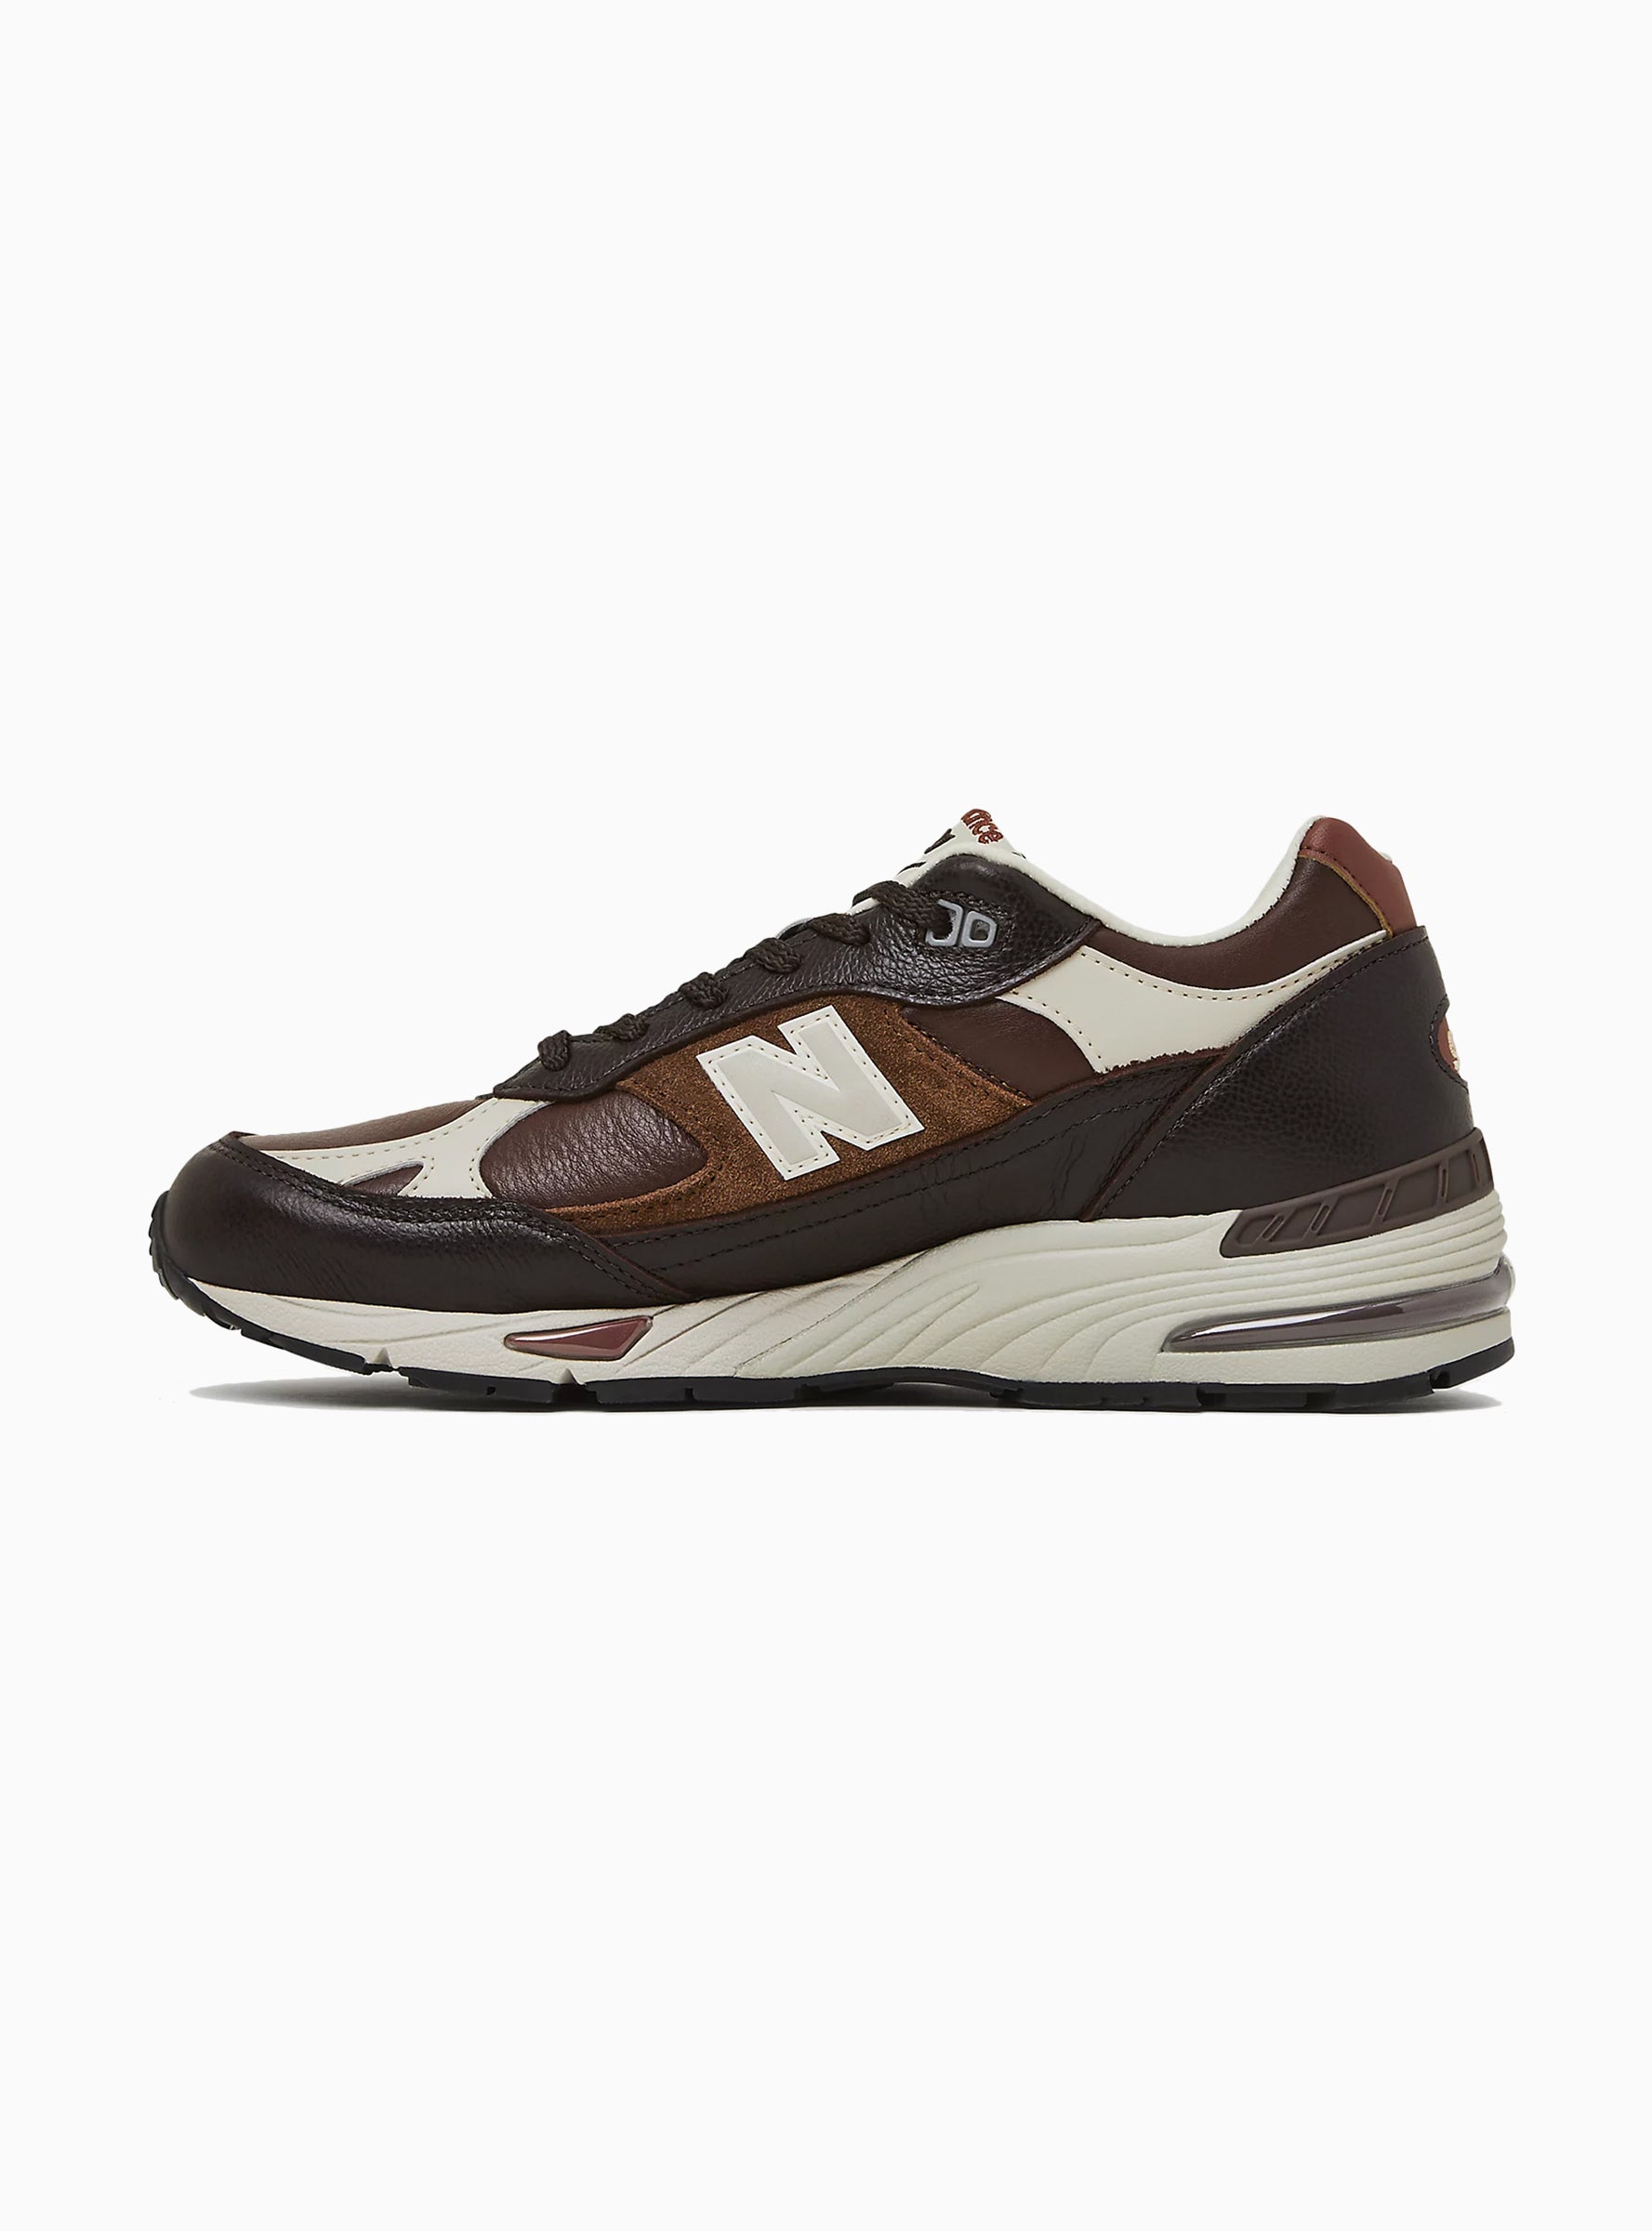 Made in UK M991GBI Sneakers Earth Brown & French Toast by New